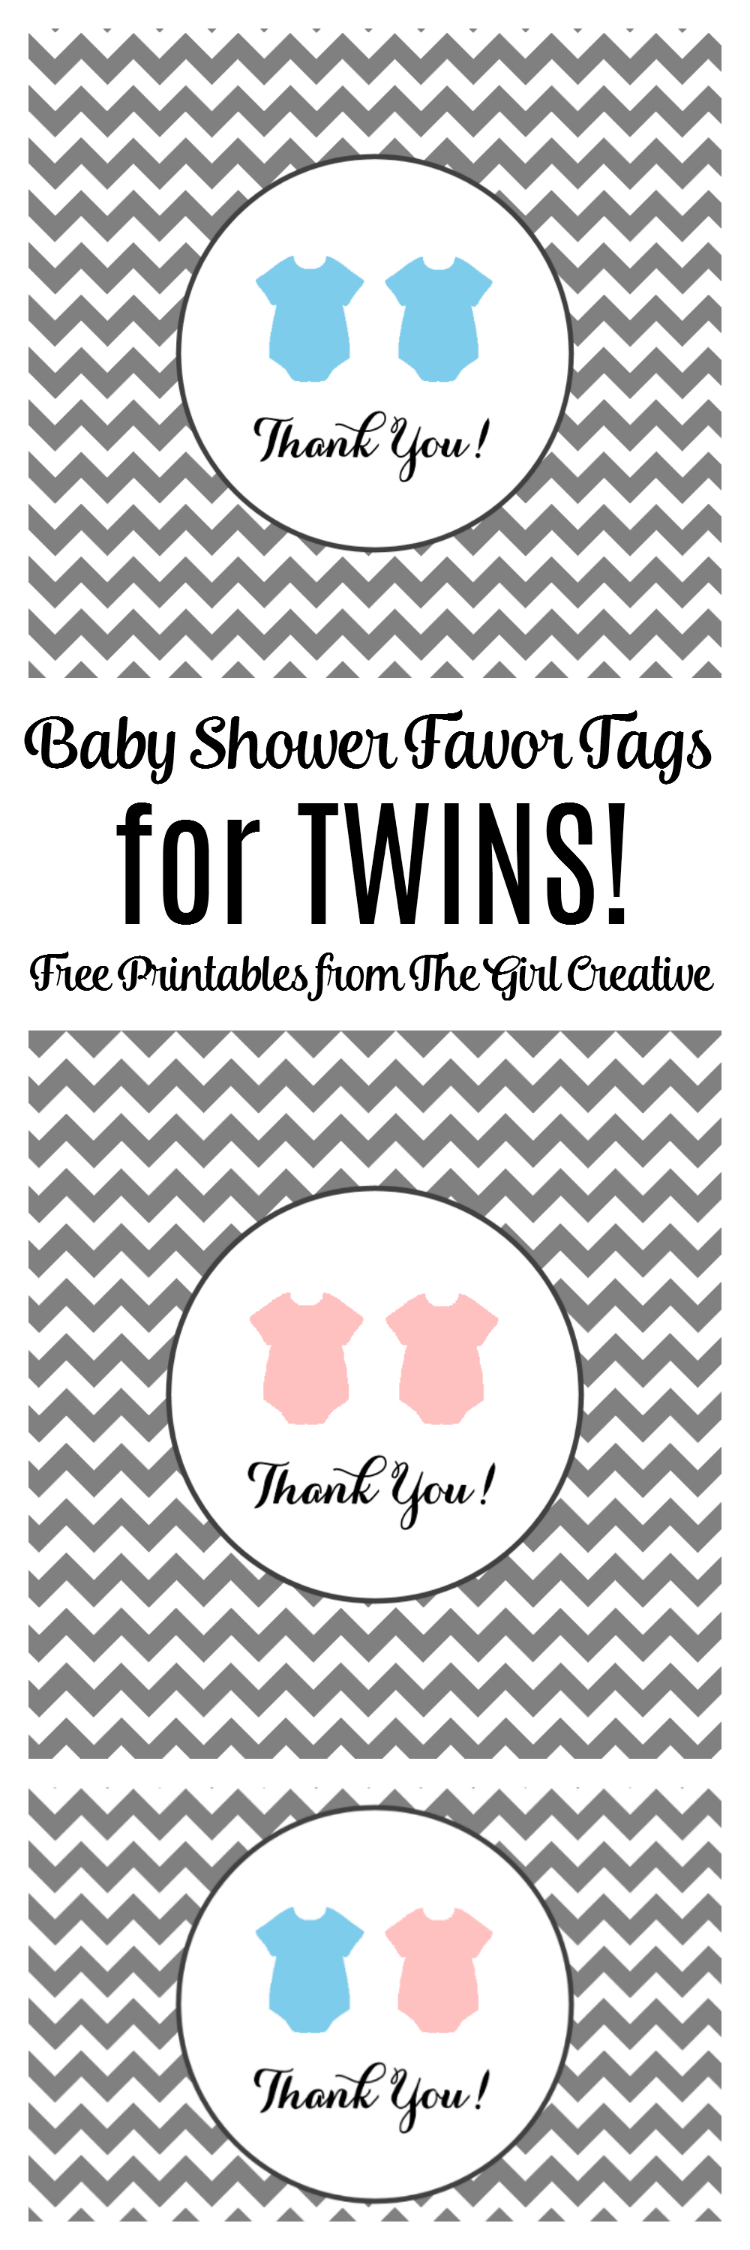 Baby Shower Favor Tags For Twins | The Top Pinned | Free Baby Shower - Free Printable Baby Shower Favor Tags Template